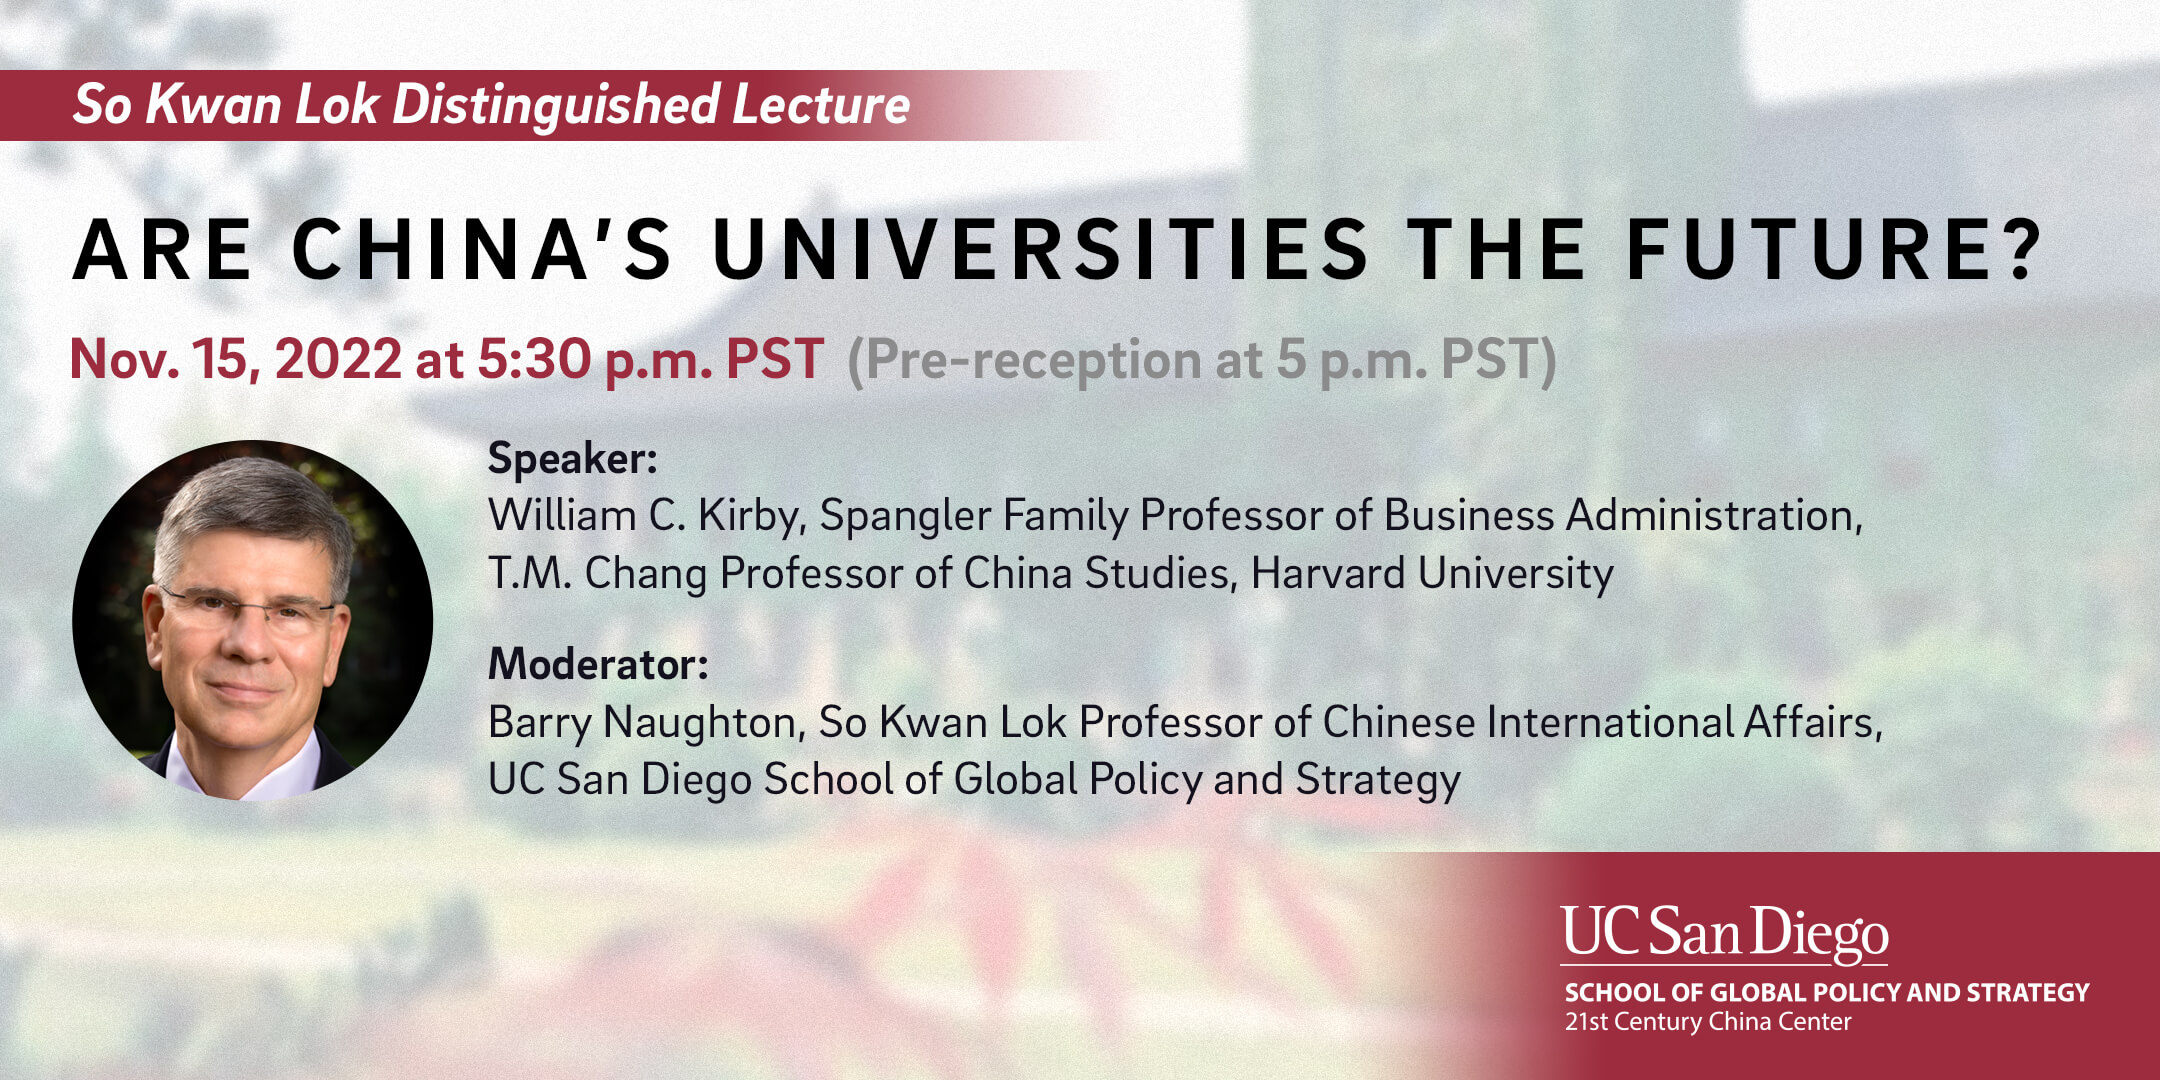 Graphic of banner with a zoomed in background of Chinese university that's blurred with white overlay, with text noting the named lecture event for So Kwon Lok Distinguished Lecture Series